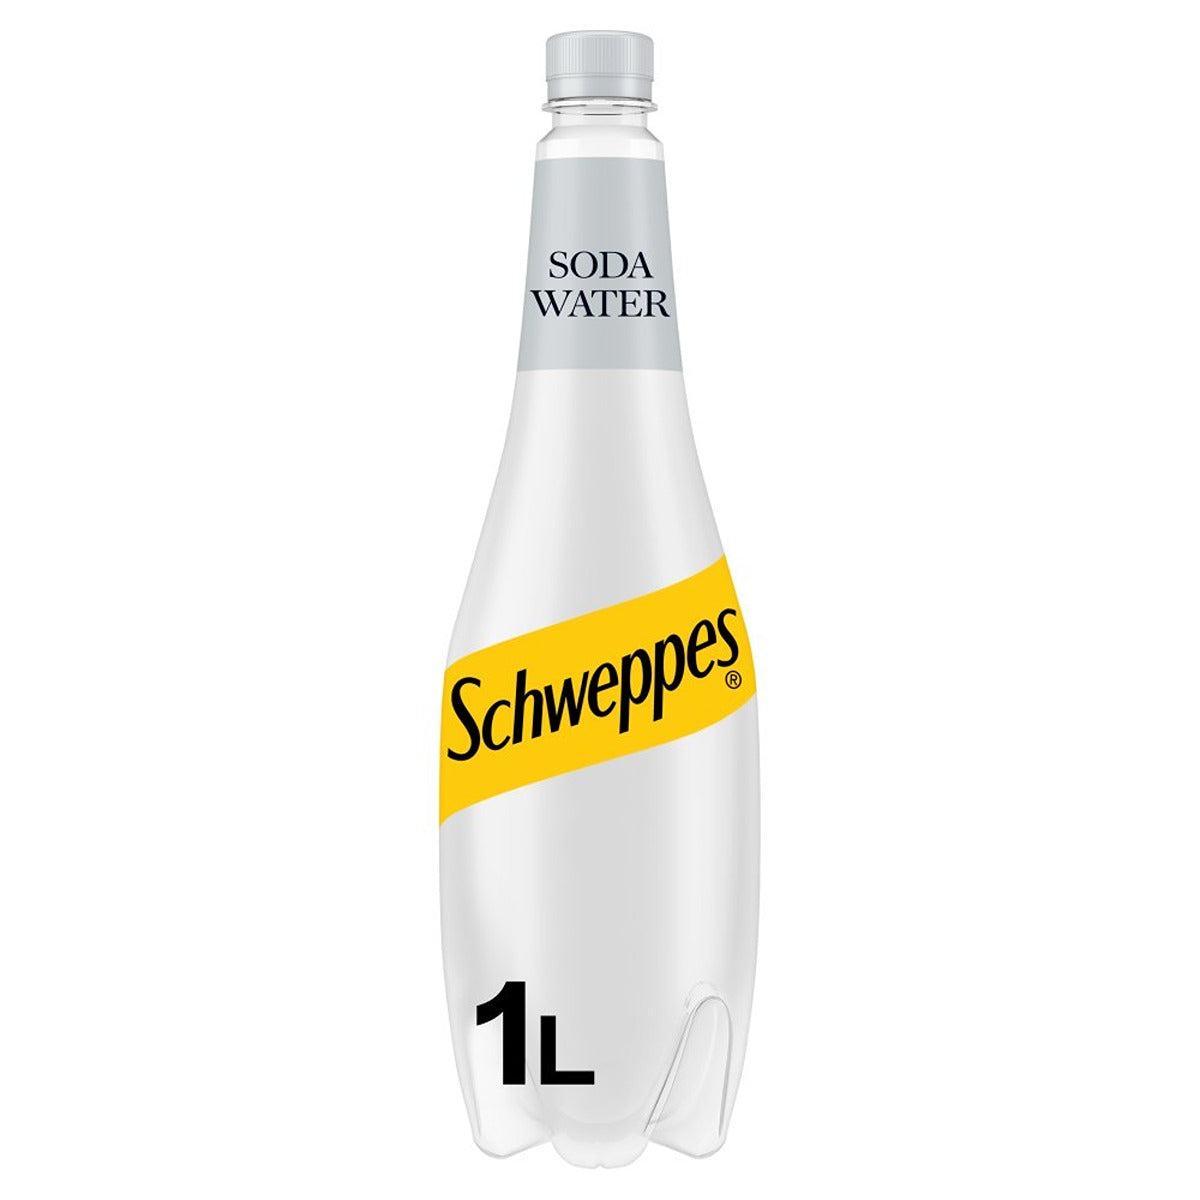 Schweppes - Soda Water - 1L - Continental Food Store